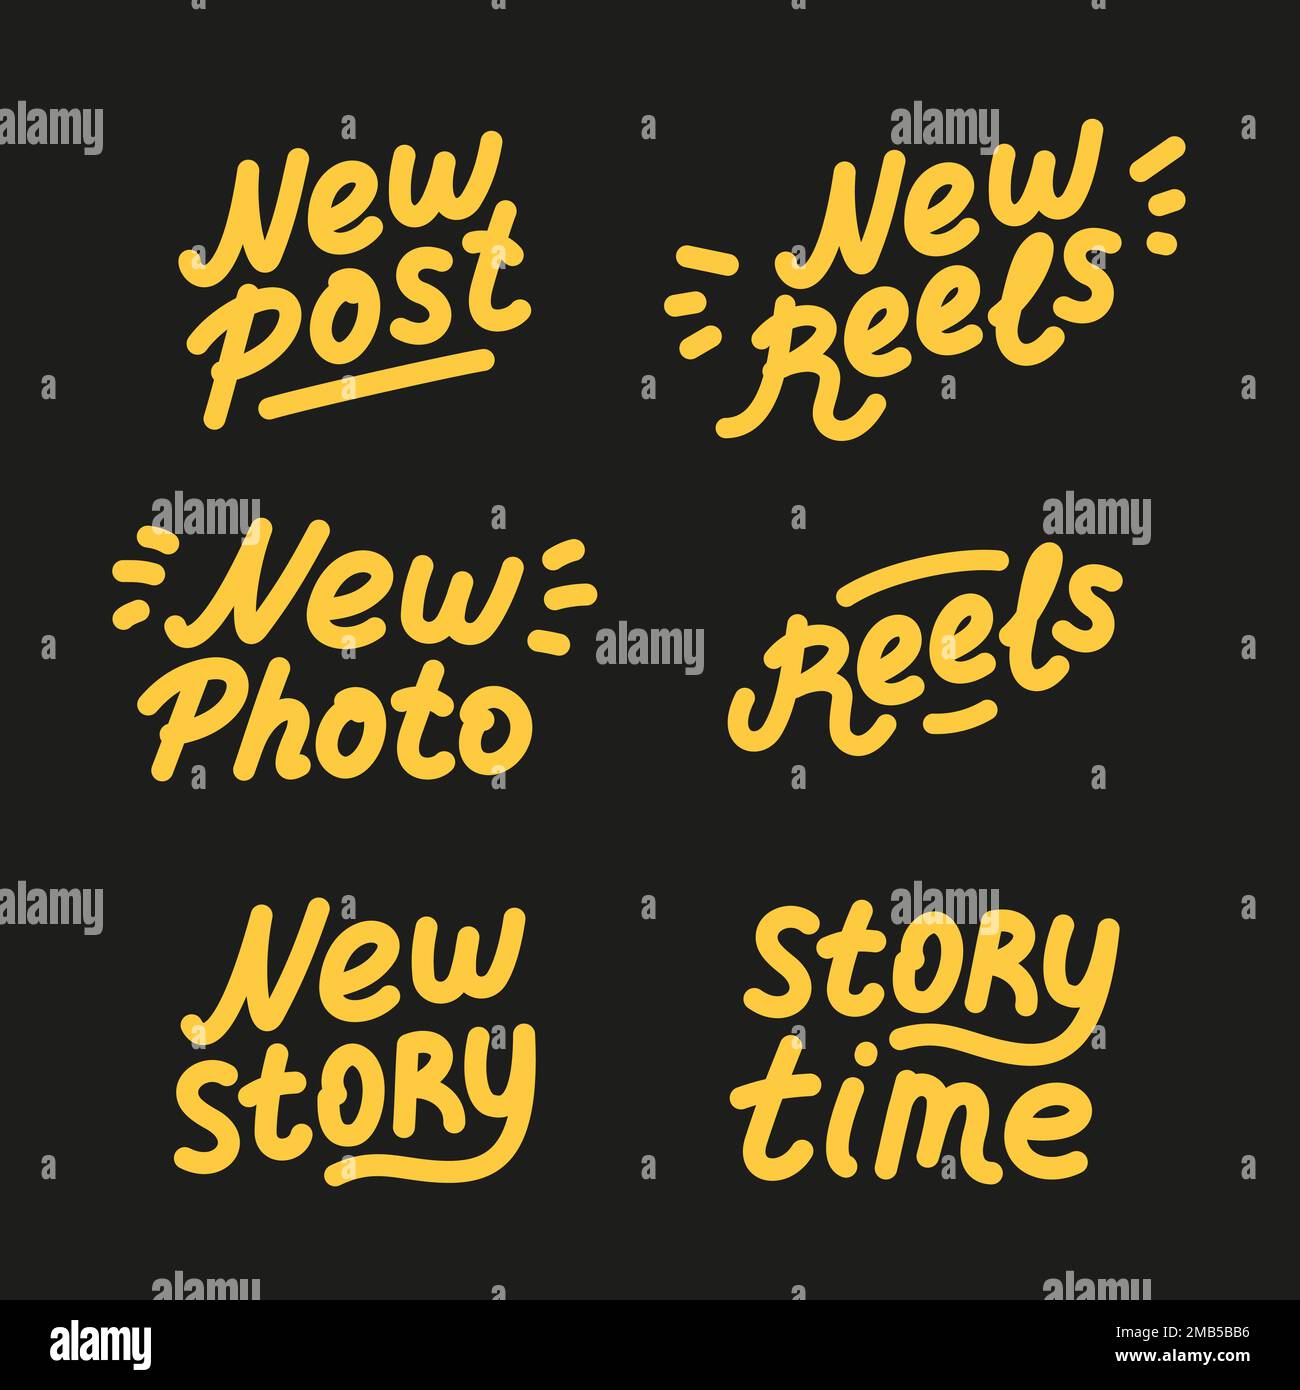 Blog content icons. Blogging or vlogging cartoon icons for social midea vector flat illustration. Stock Vector